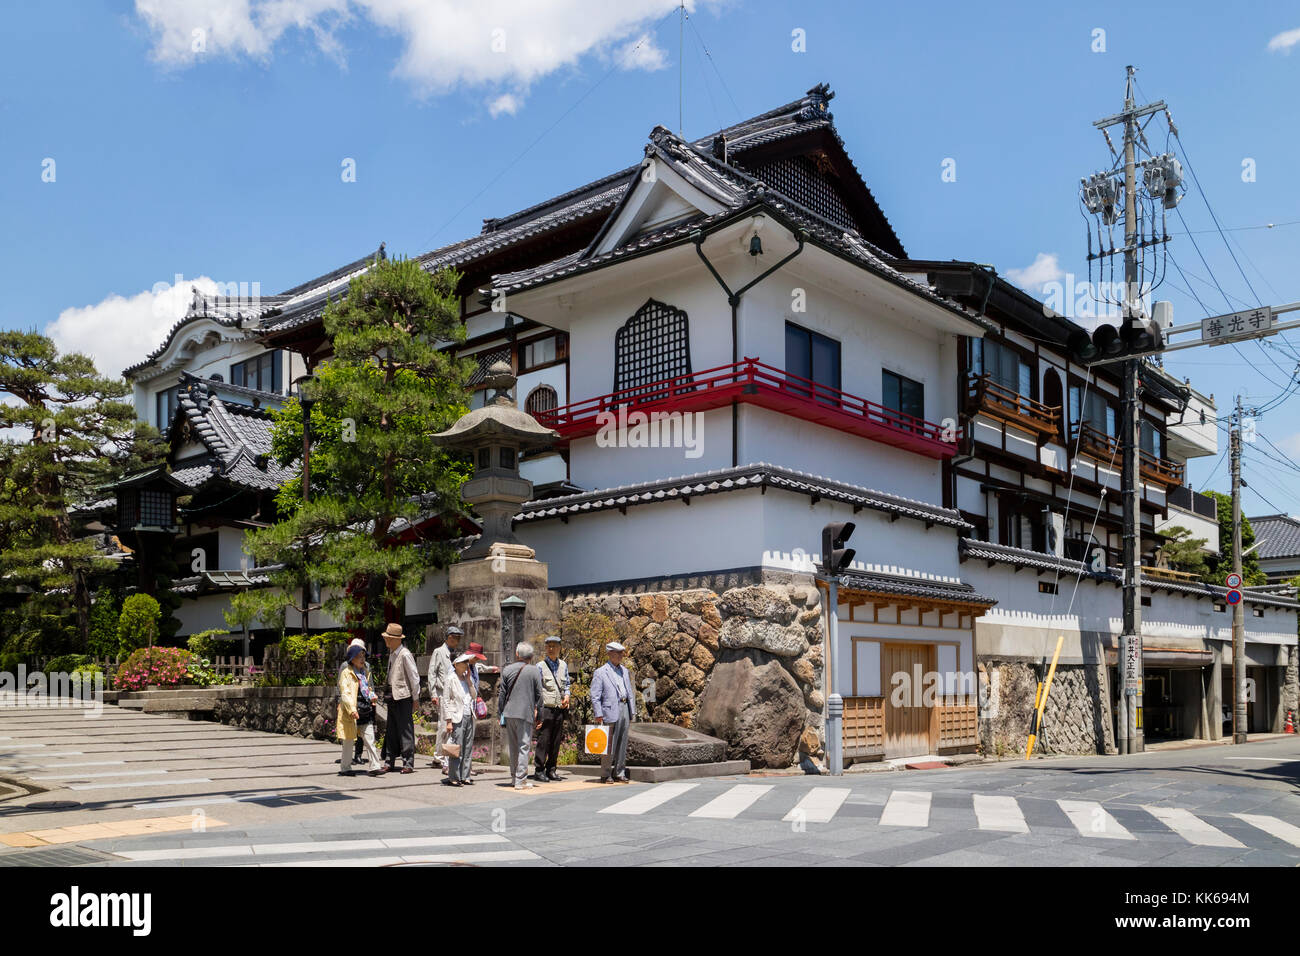 Nagano, Japan - June 5, 2017:  Street corner in Nagano with traditional houses and Japanese tourists Stock Photo